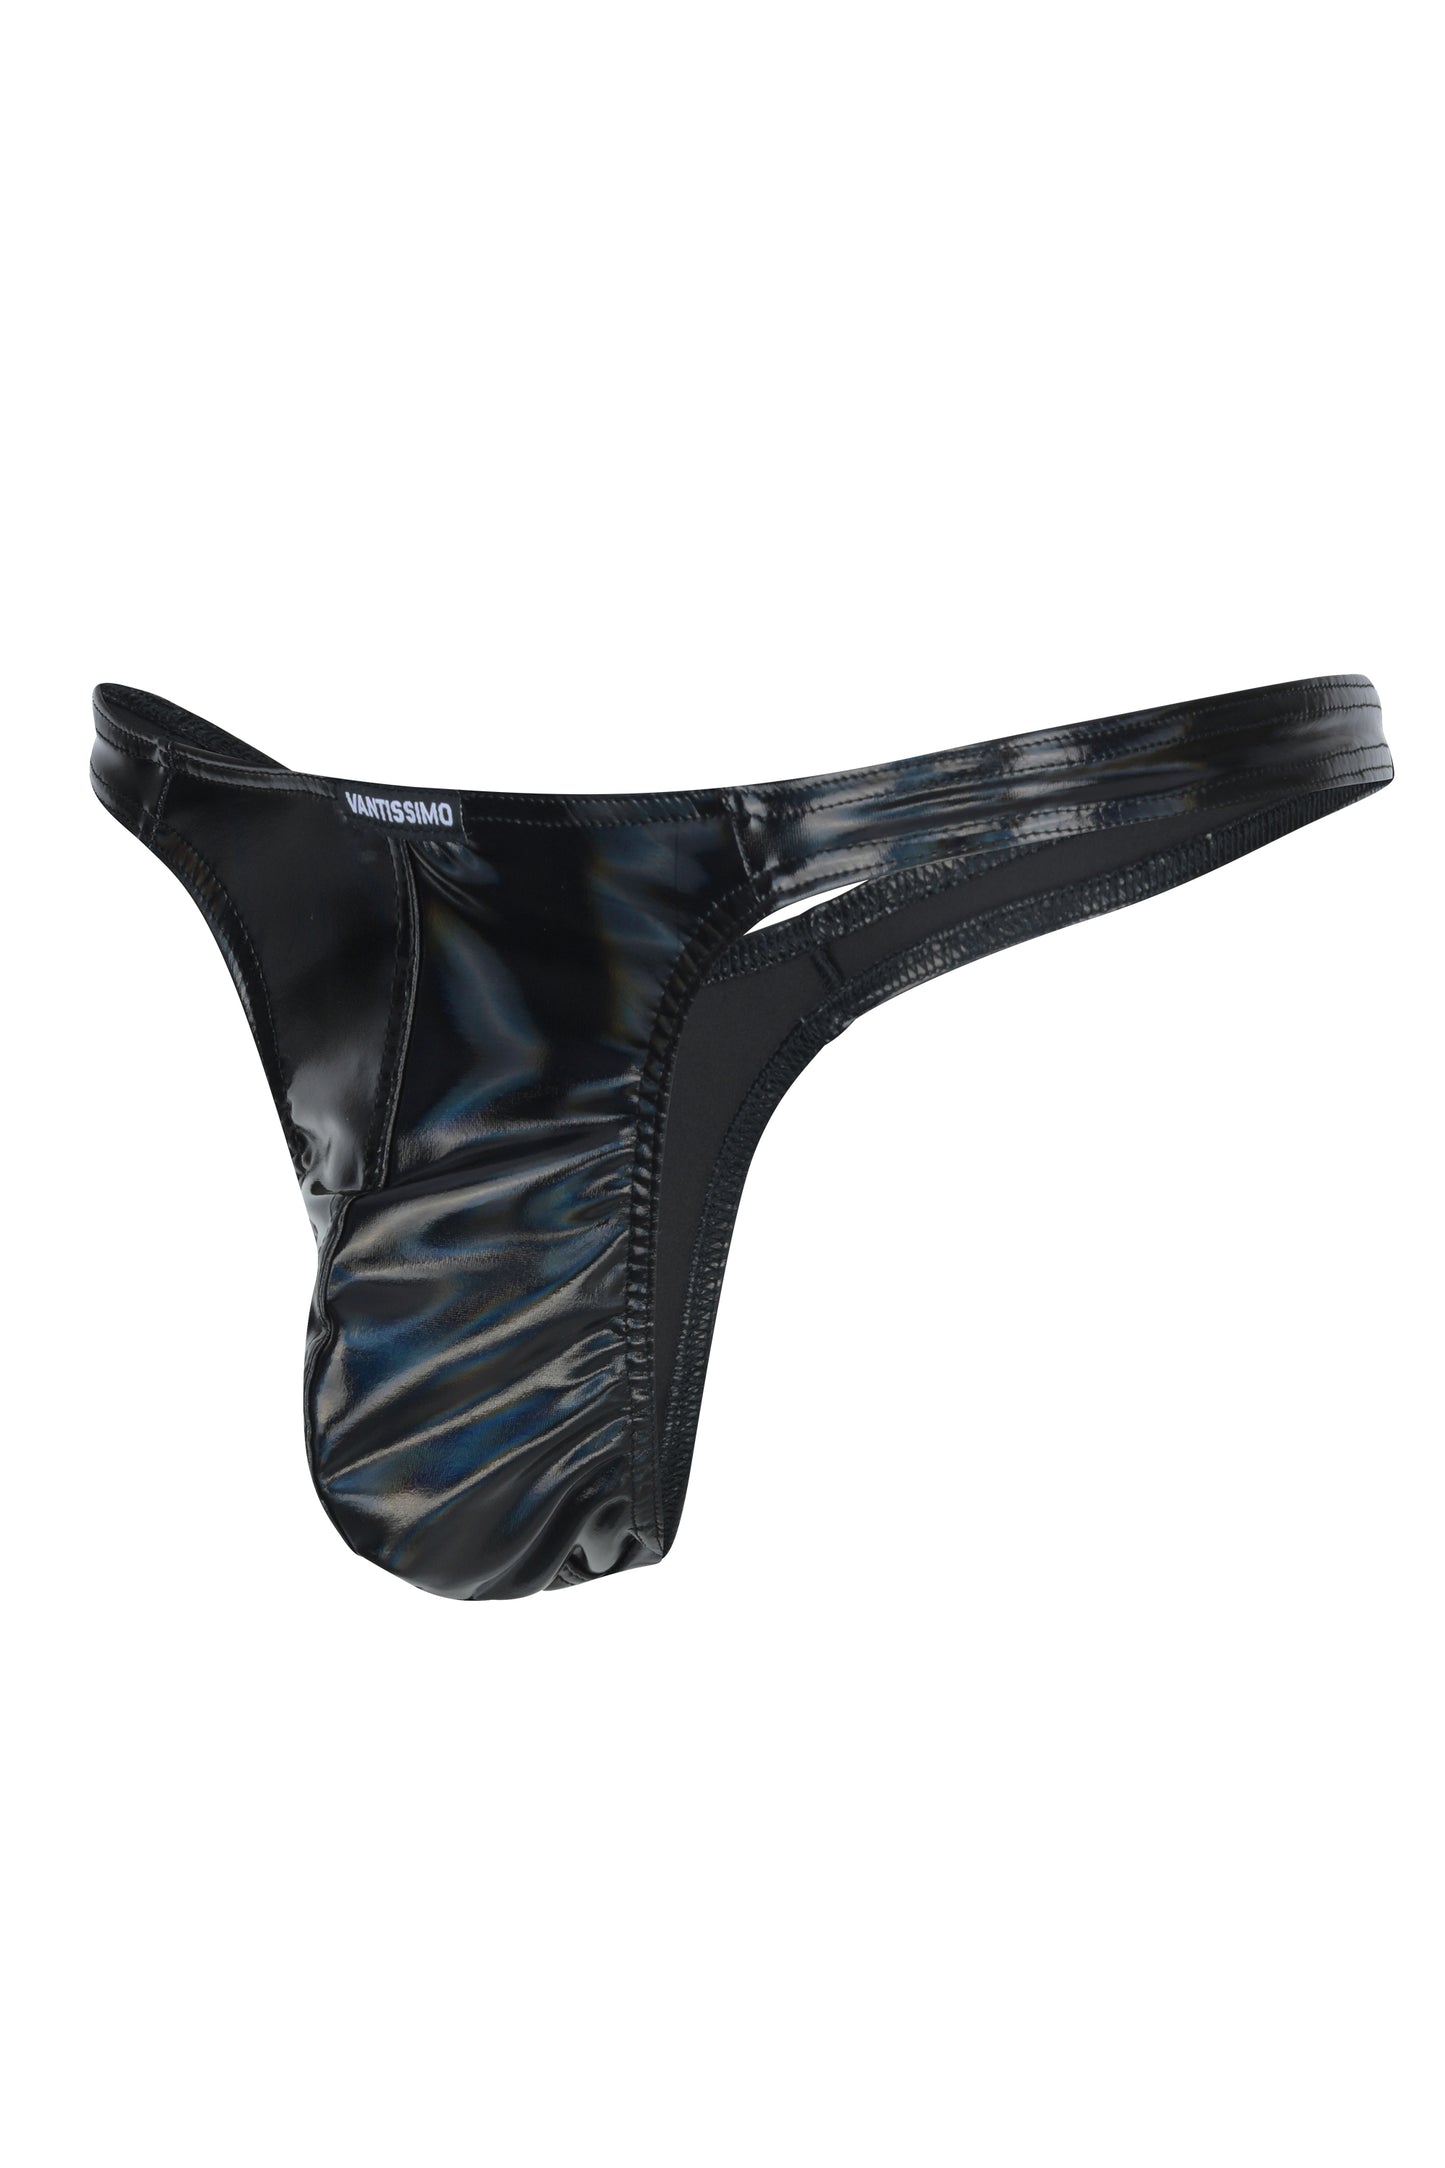 MEN'S STRING TANGA BLACK HIGH GLOSS LACQUER LATEX LEATHER LOOK